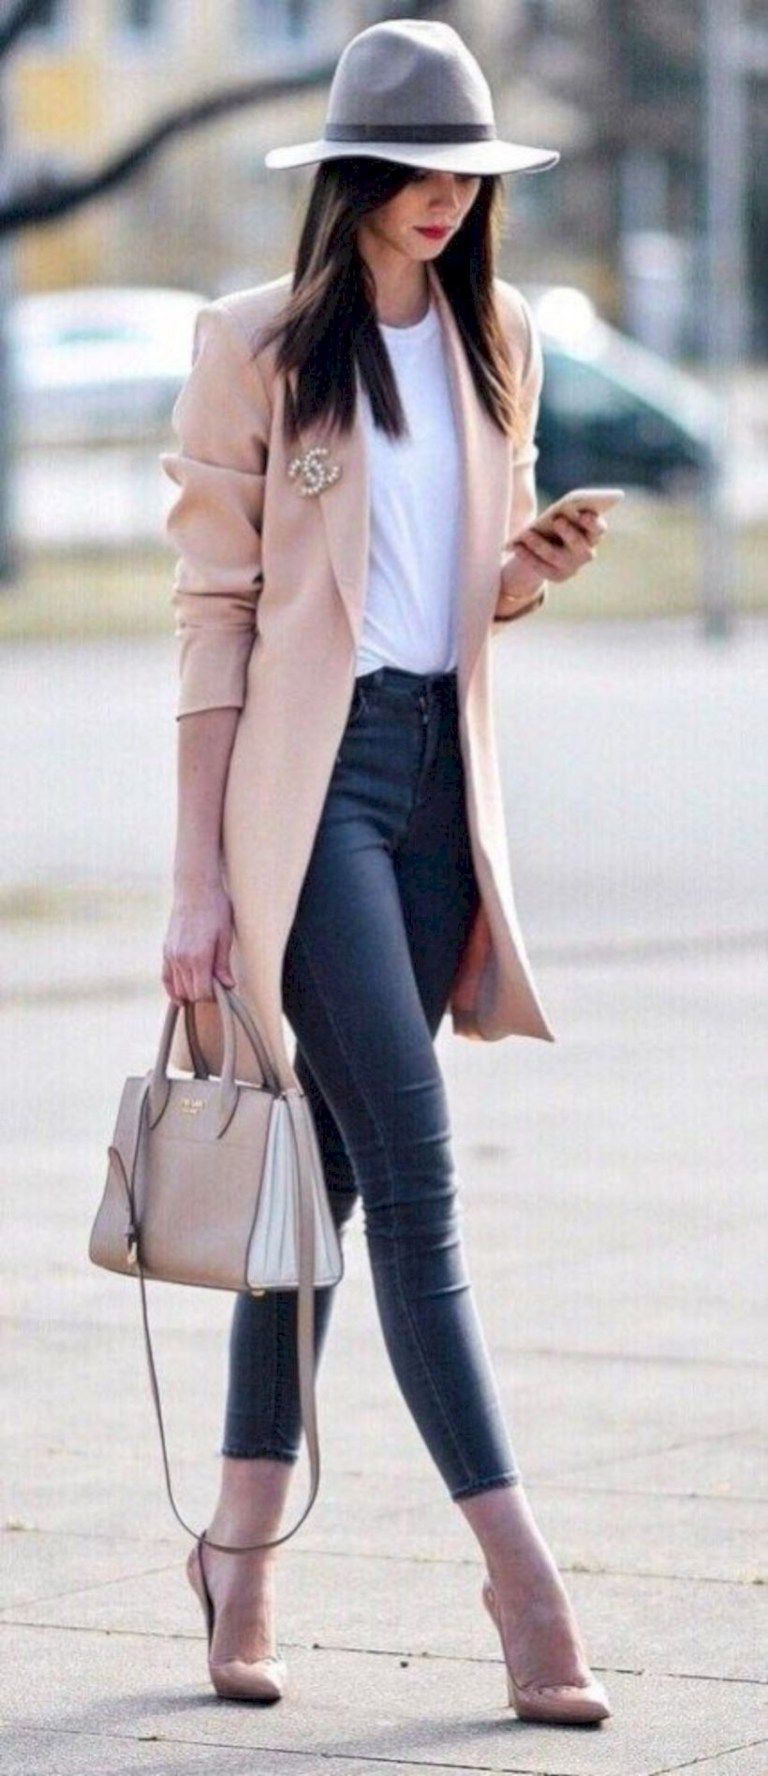 10 Ways to Look Classy on a Budget